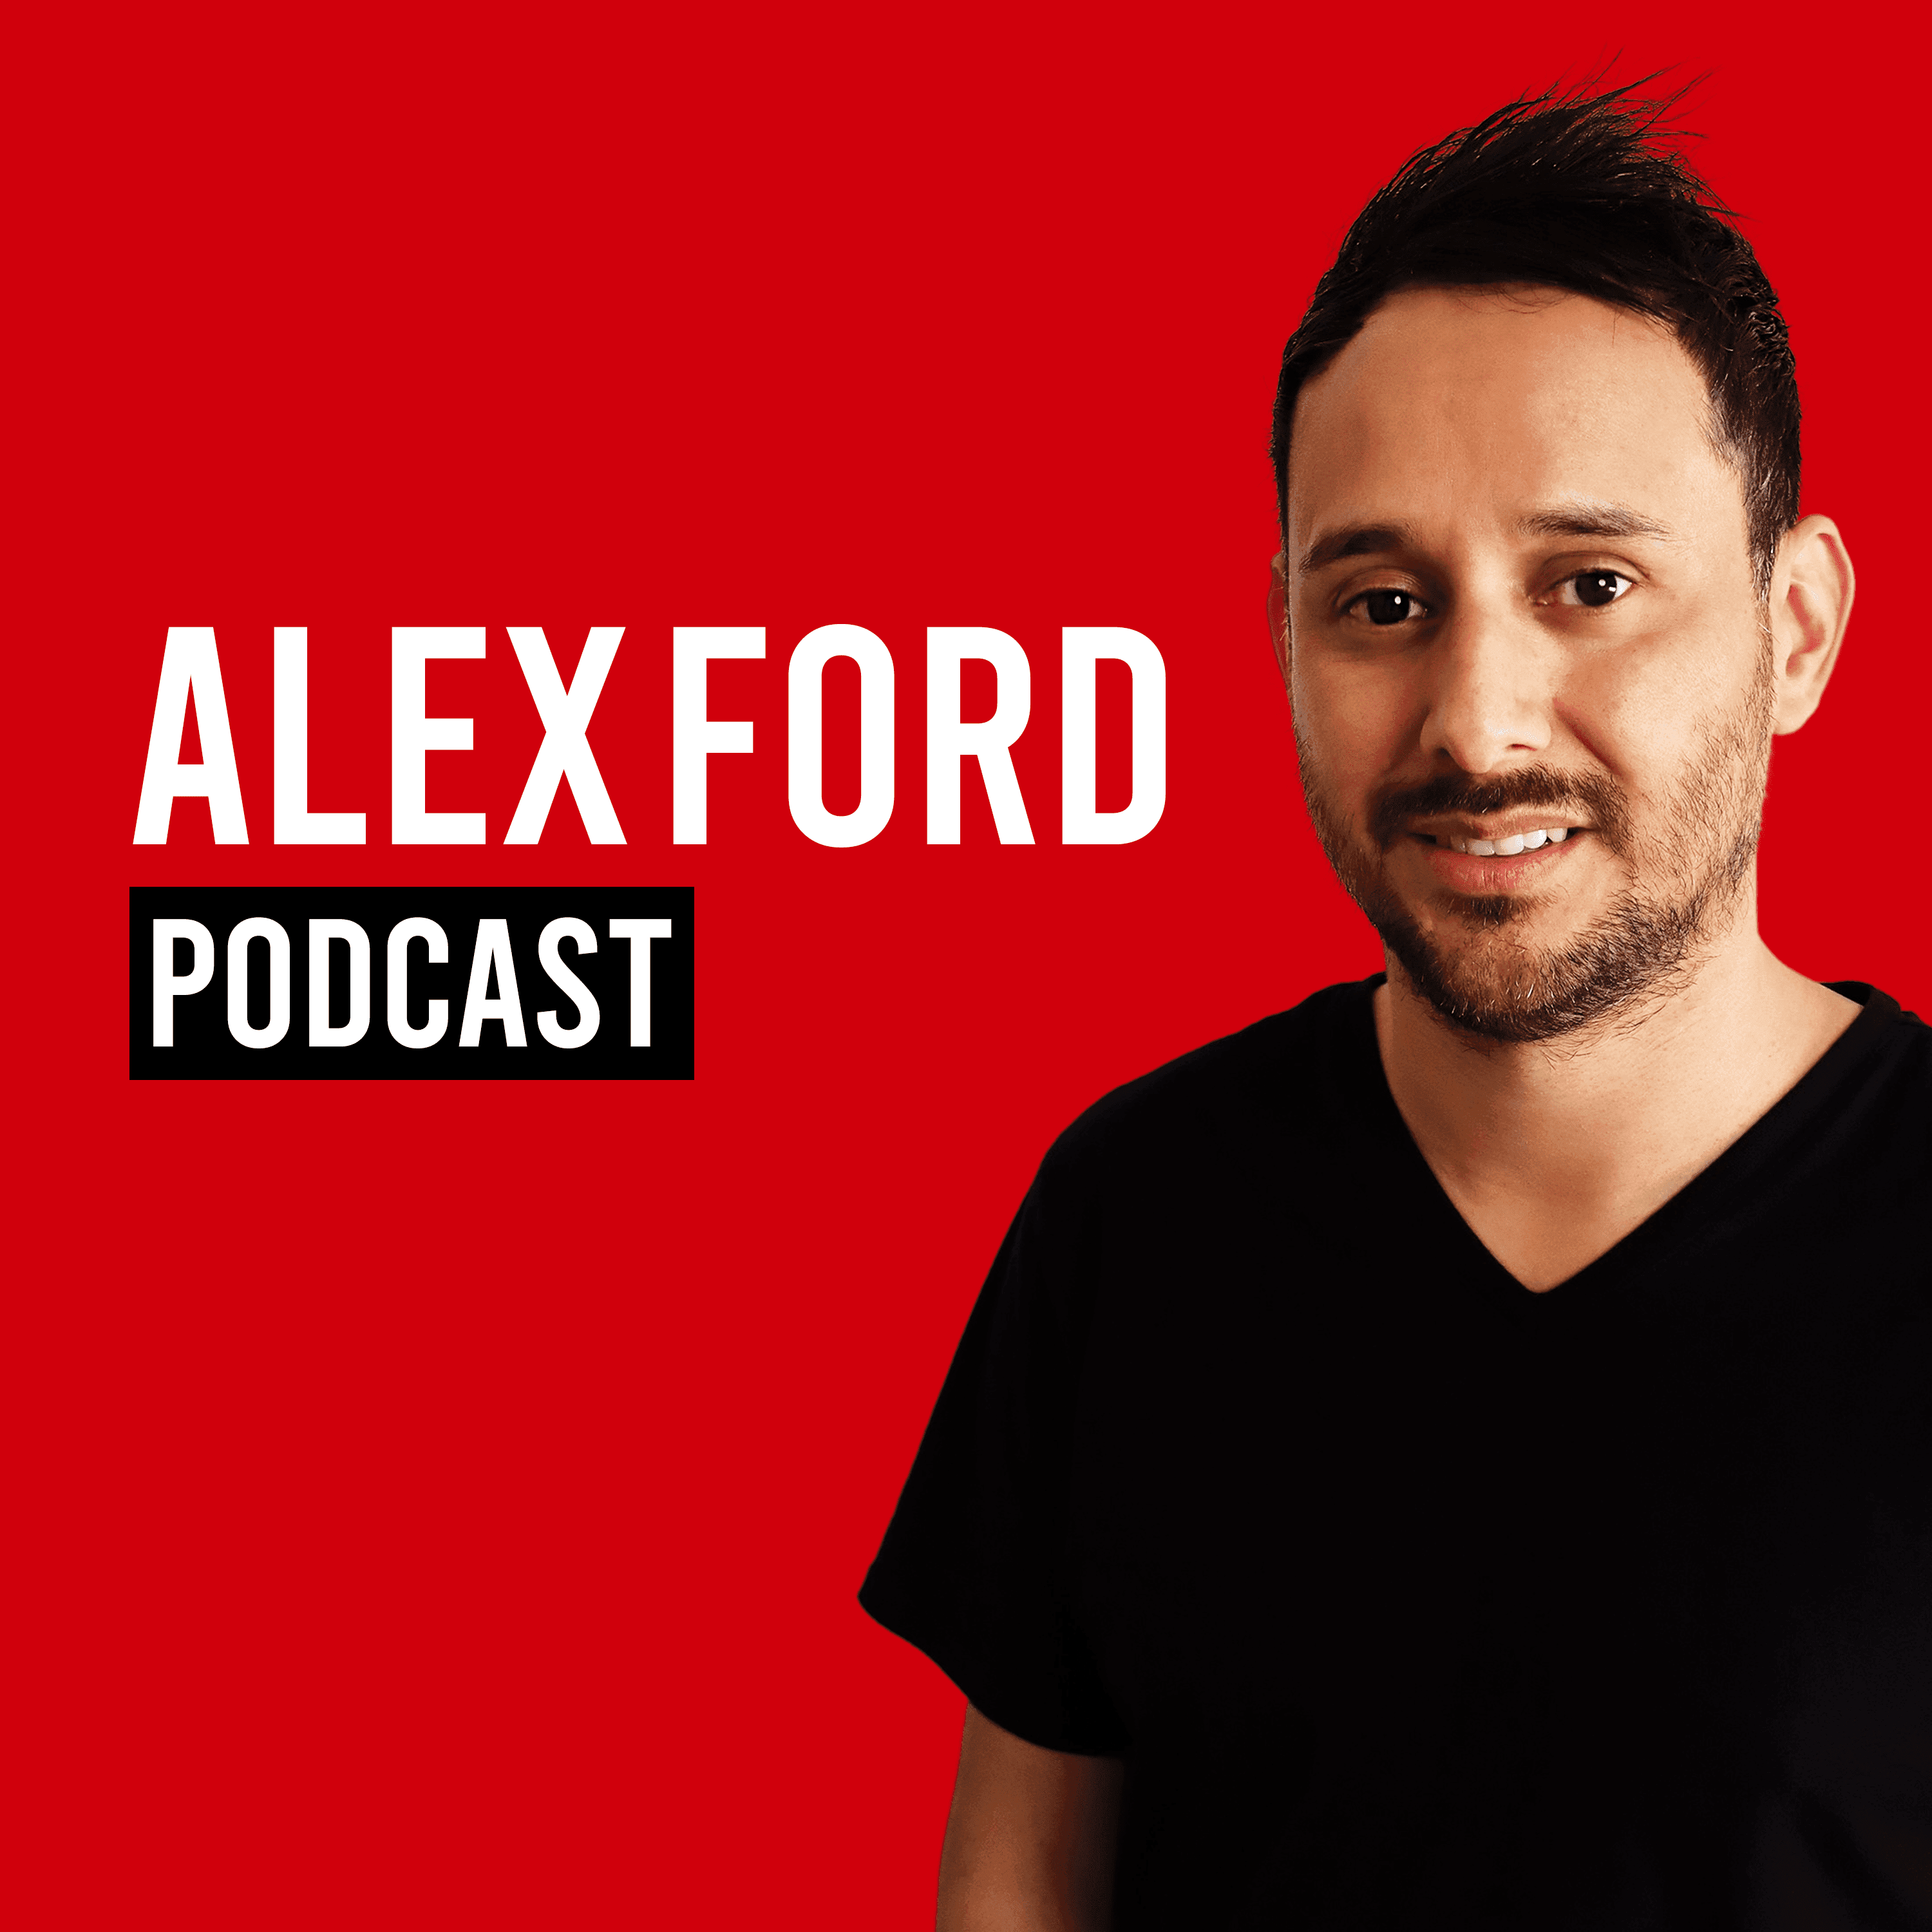 The Alex Ford Podcast